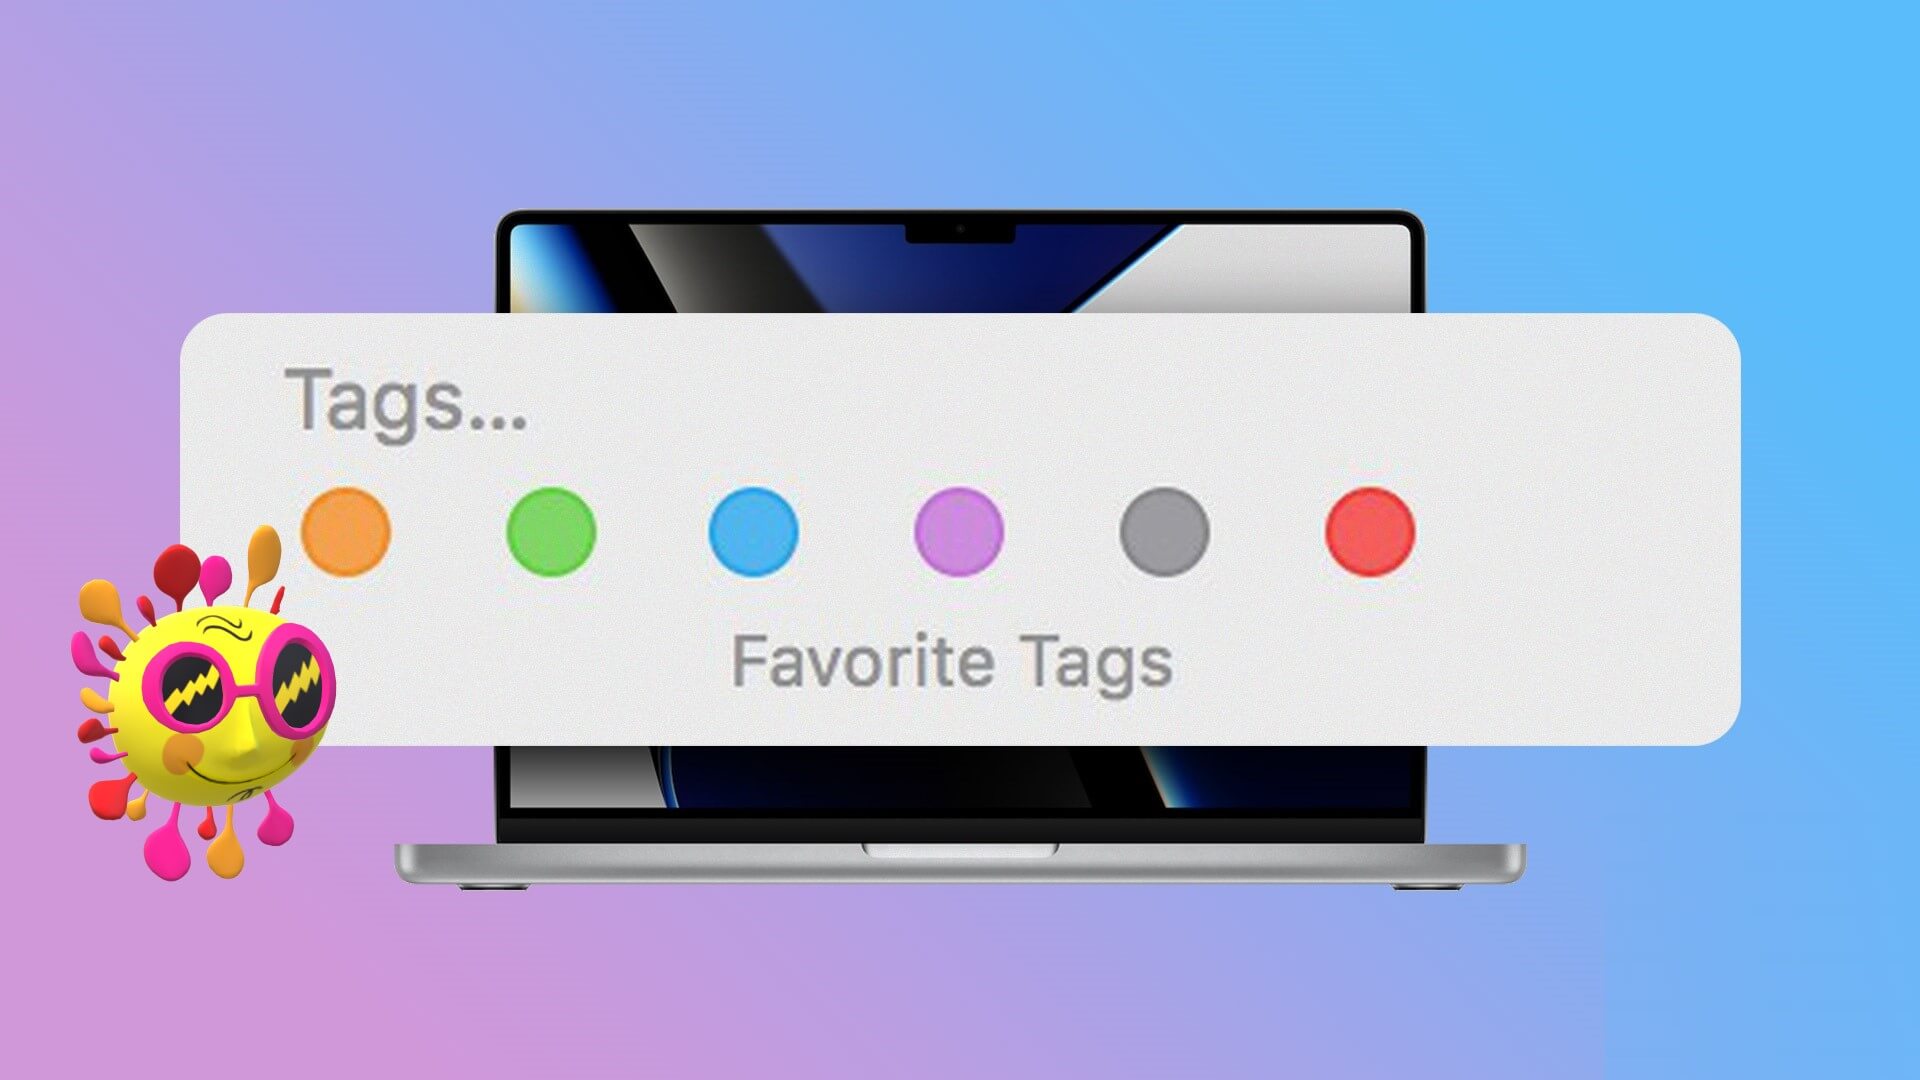 How to use tags in Finder to organize files on